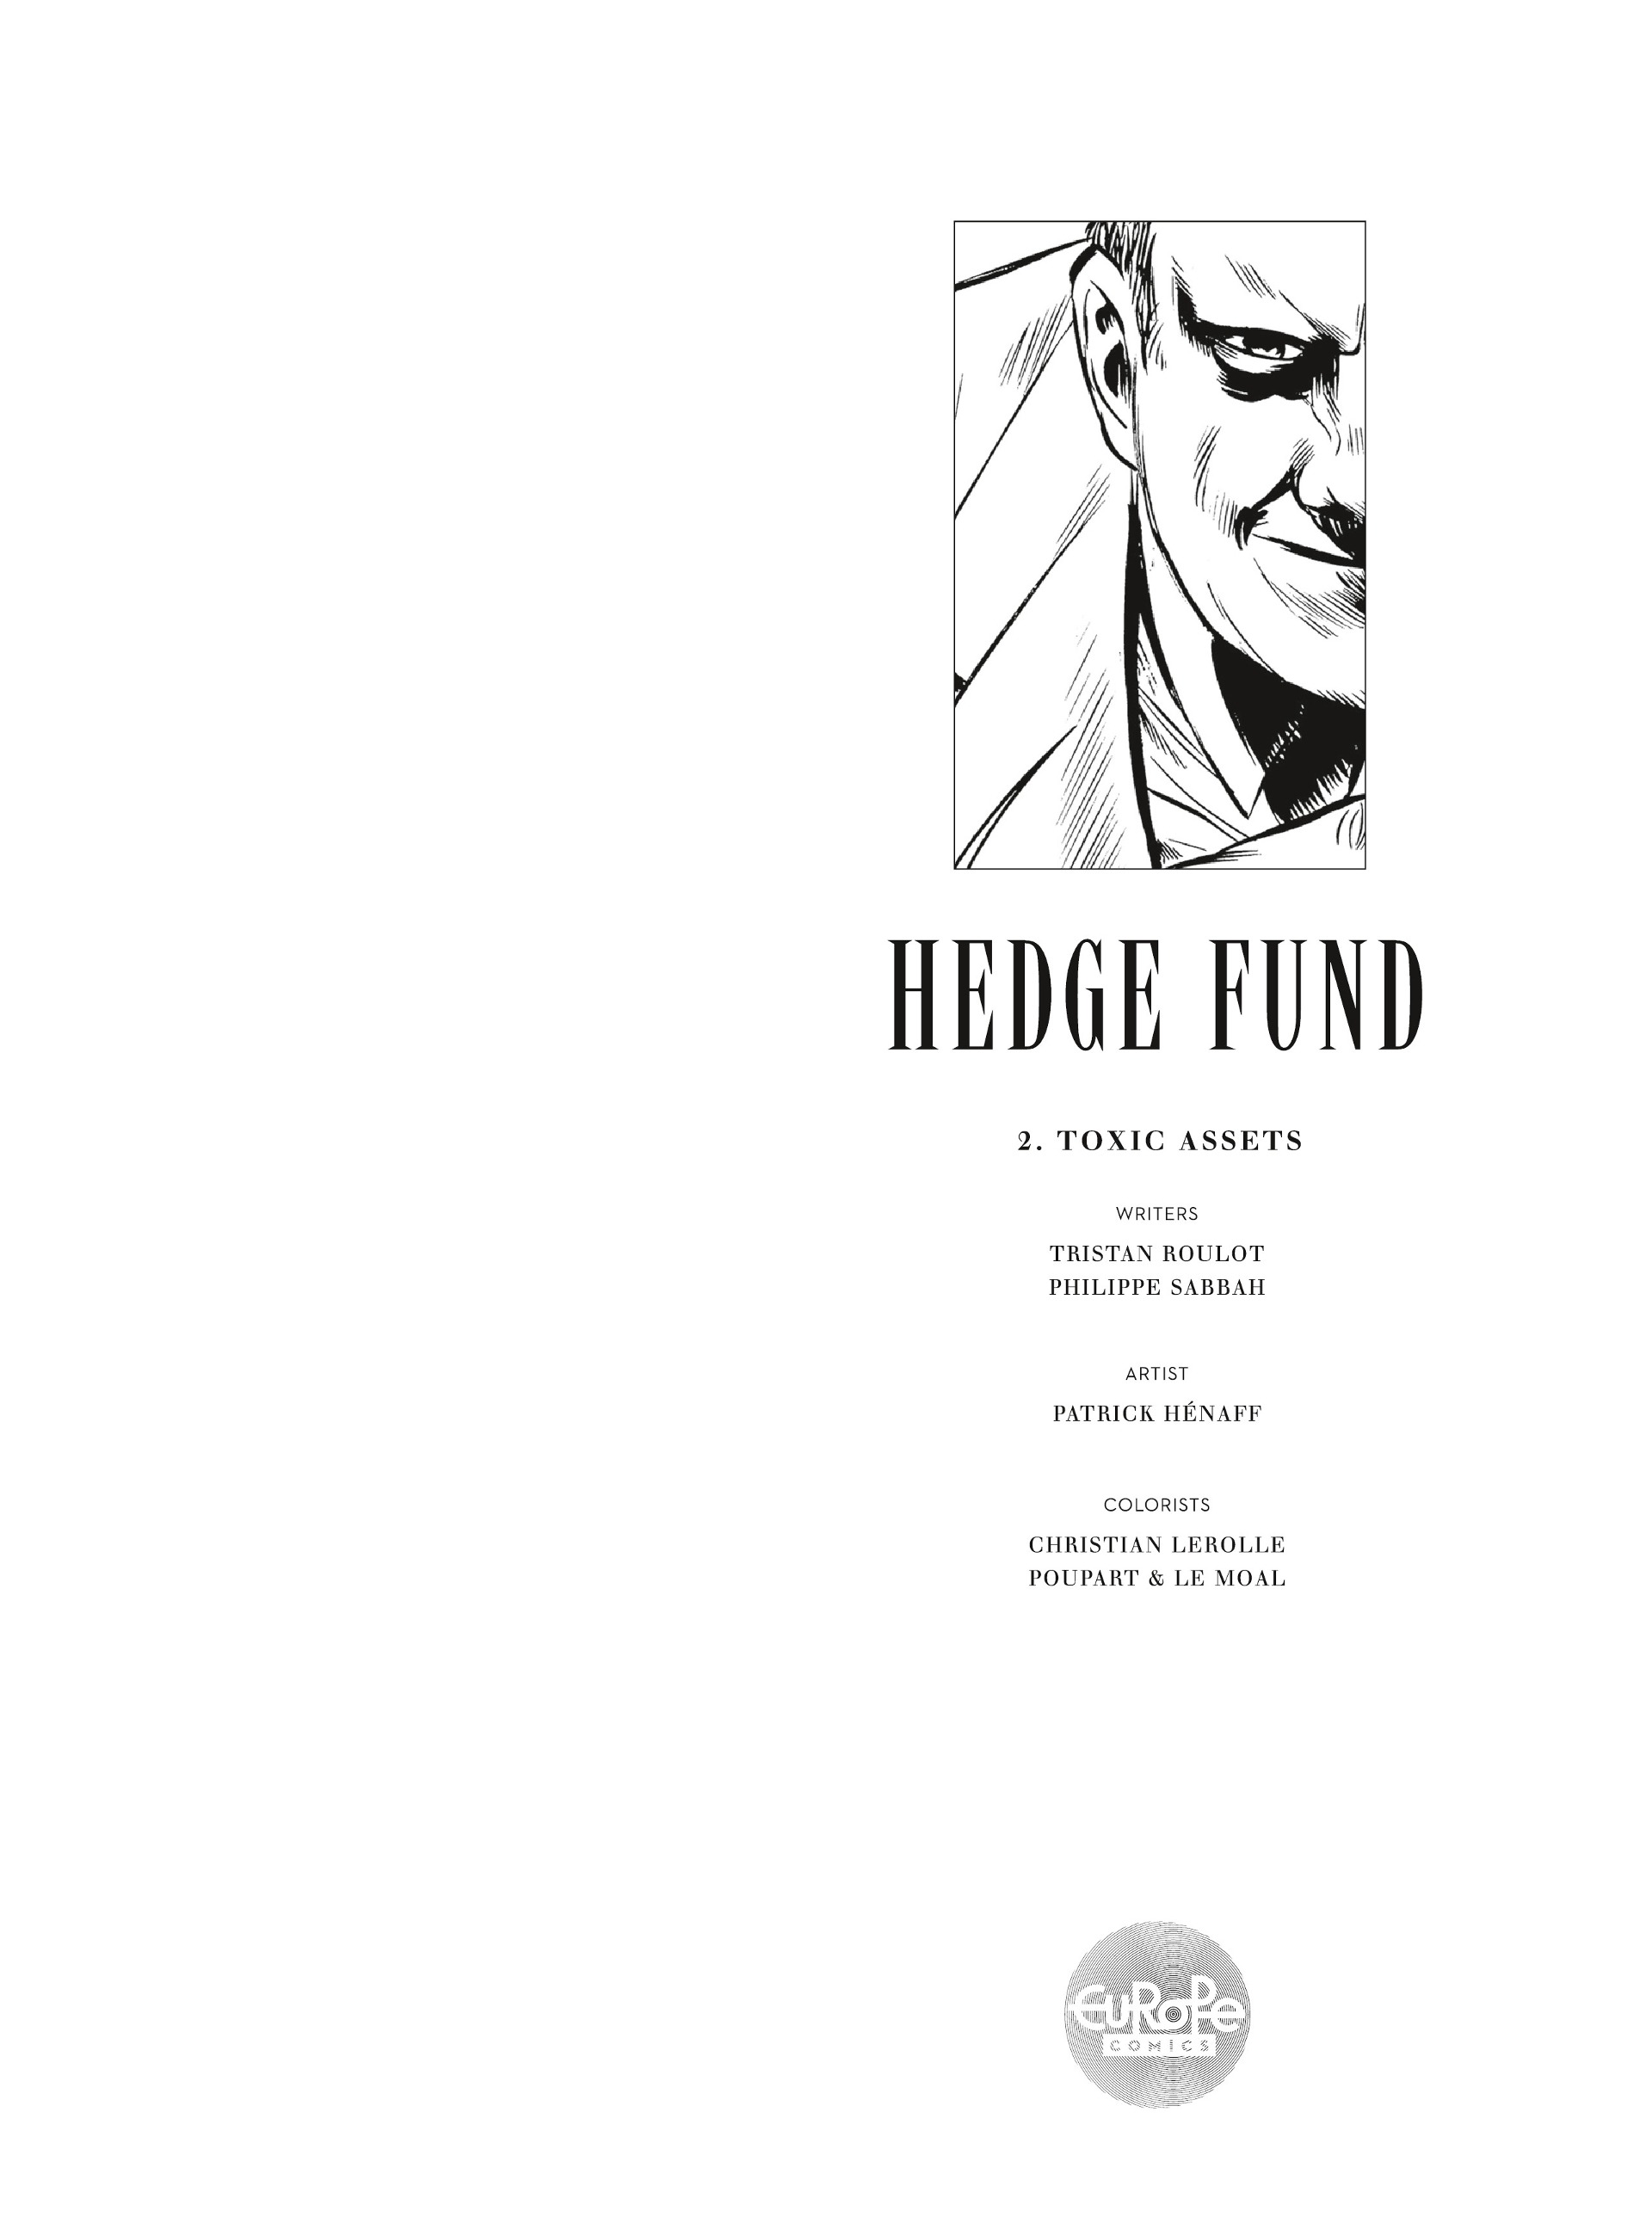 Read online Hedge Fund comic -  Issue #2 - 2